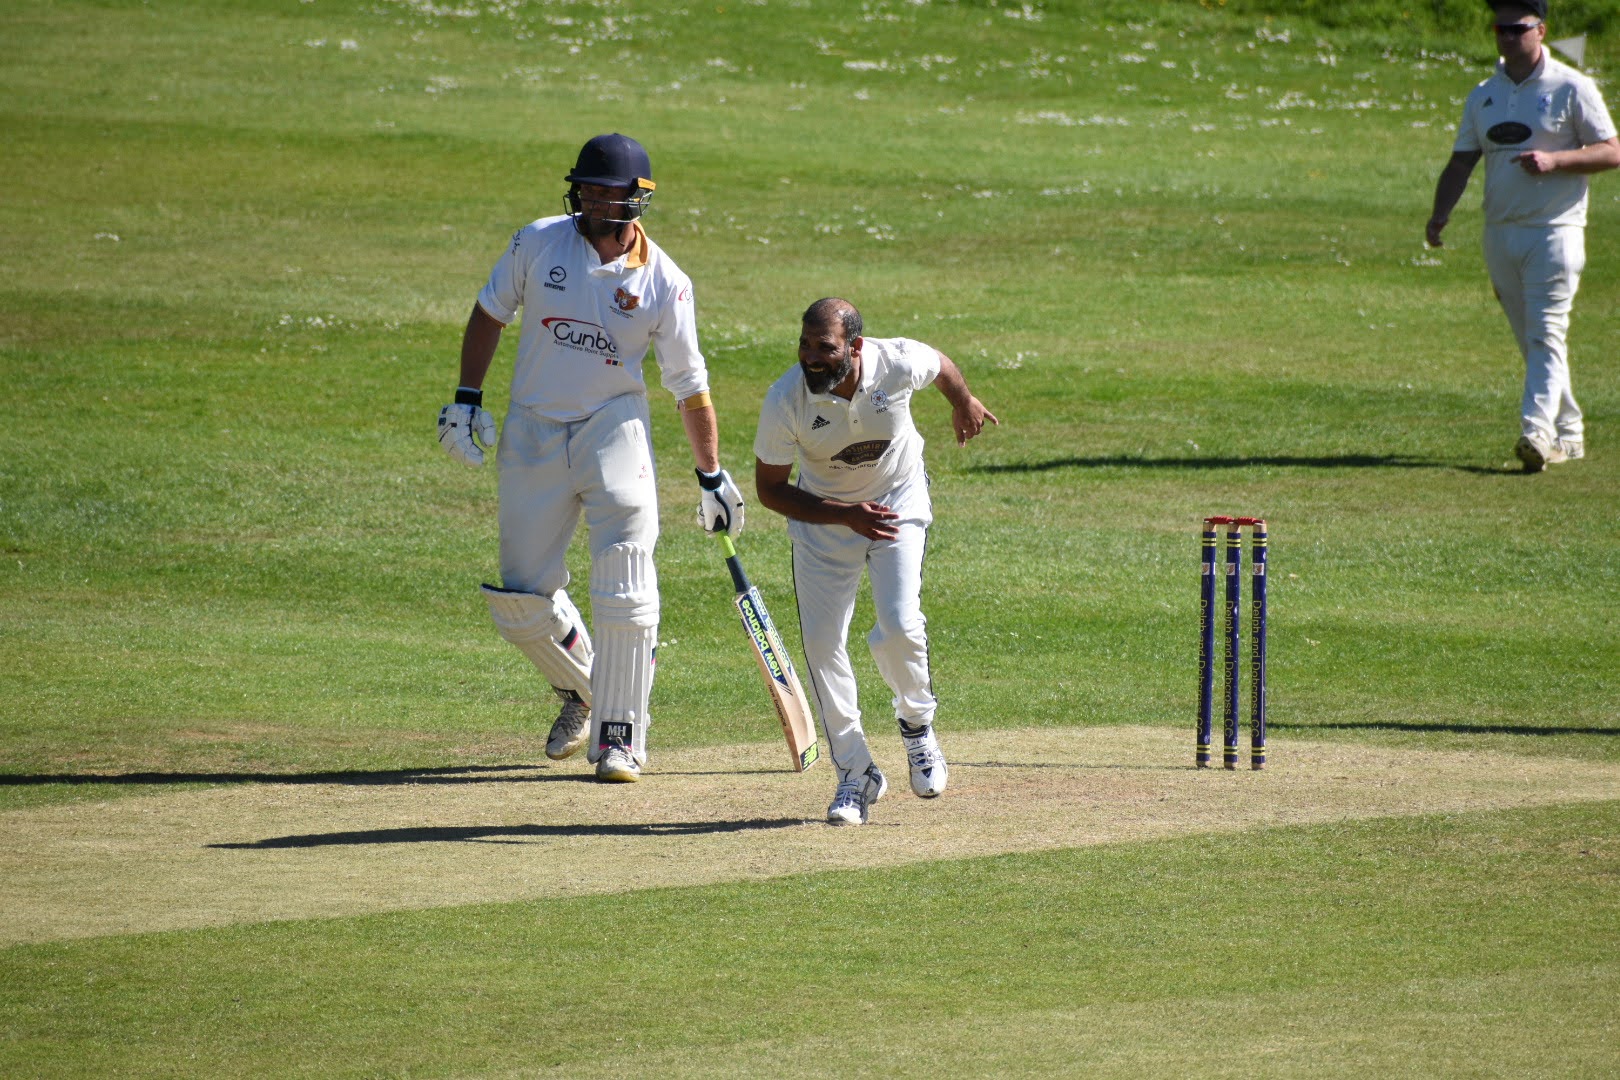 Azhar Annihilates Honley To Send Swaine Clear At Summit  - Premiership Matchday 7 Review